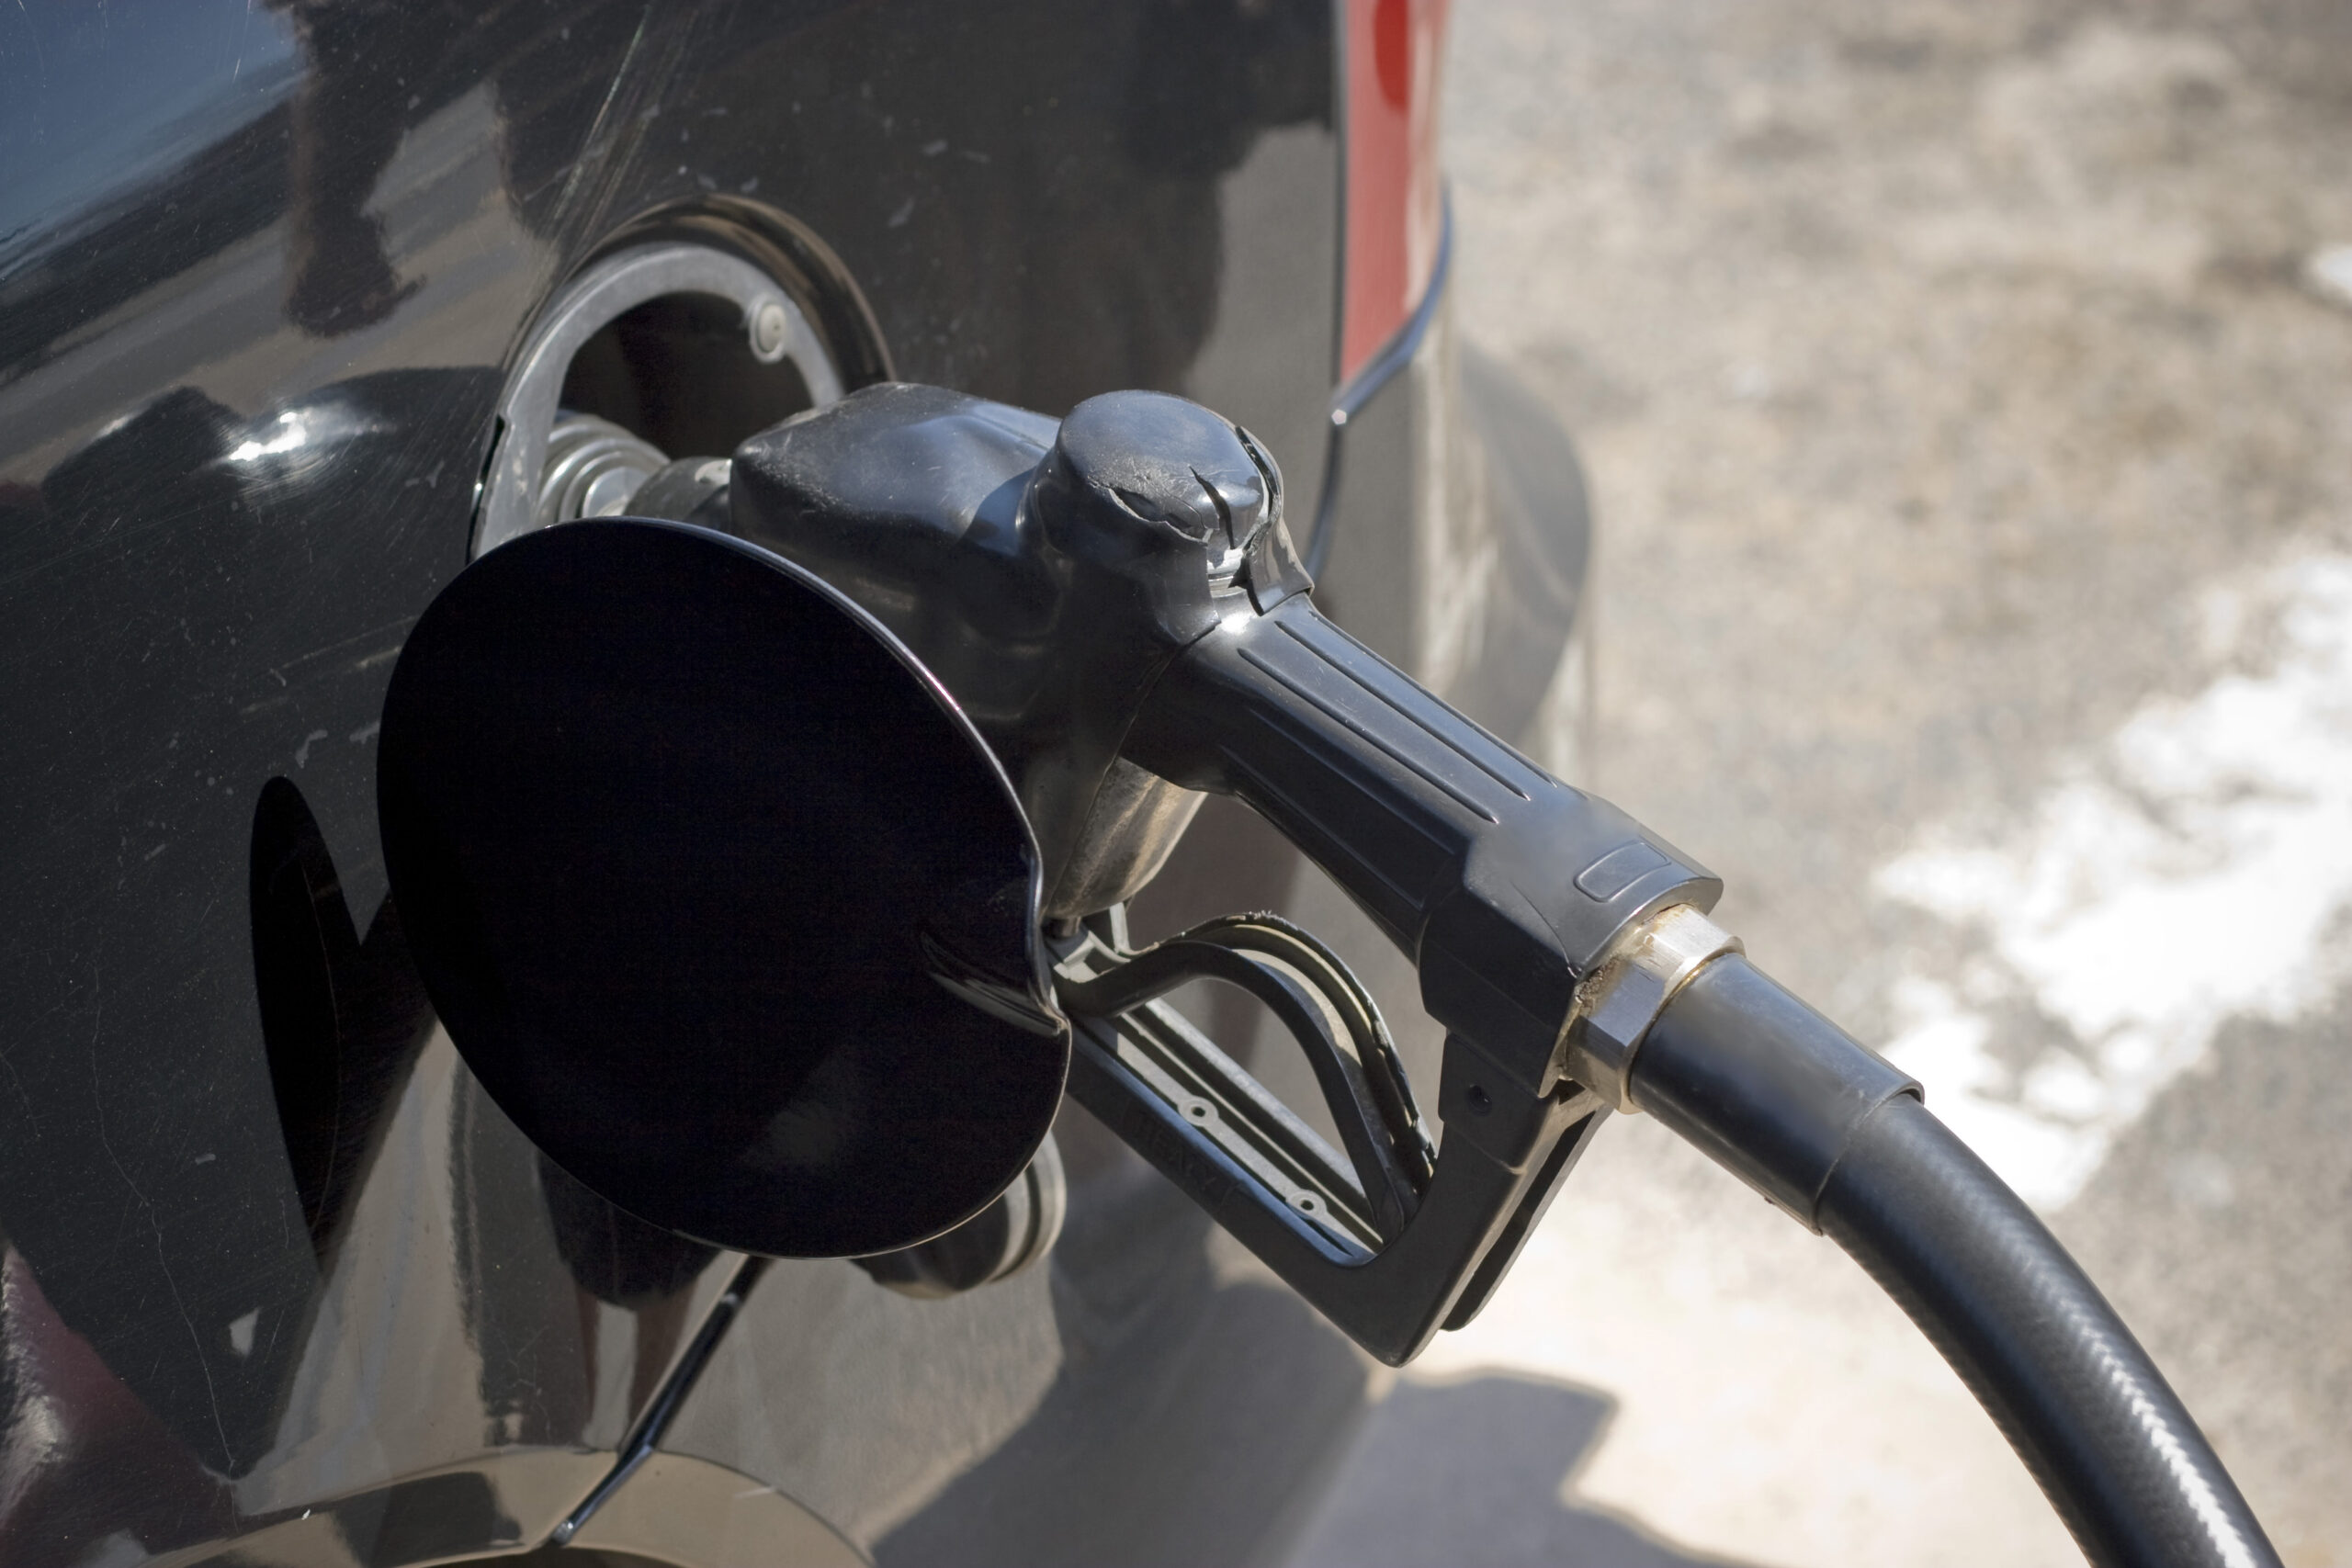 Gas at the pump can be more costly than you expect